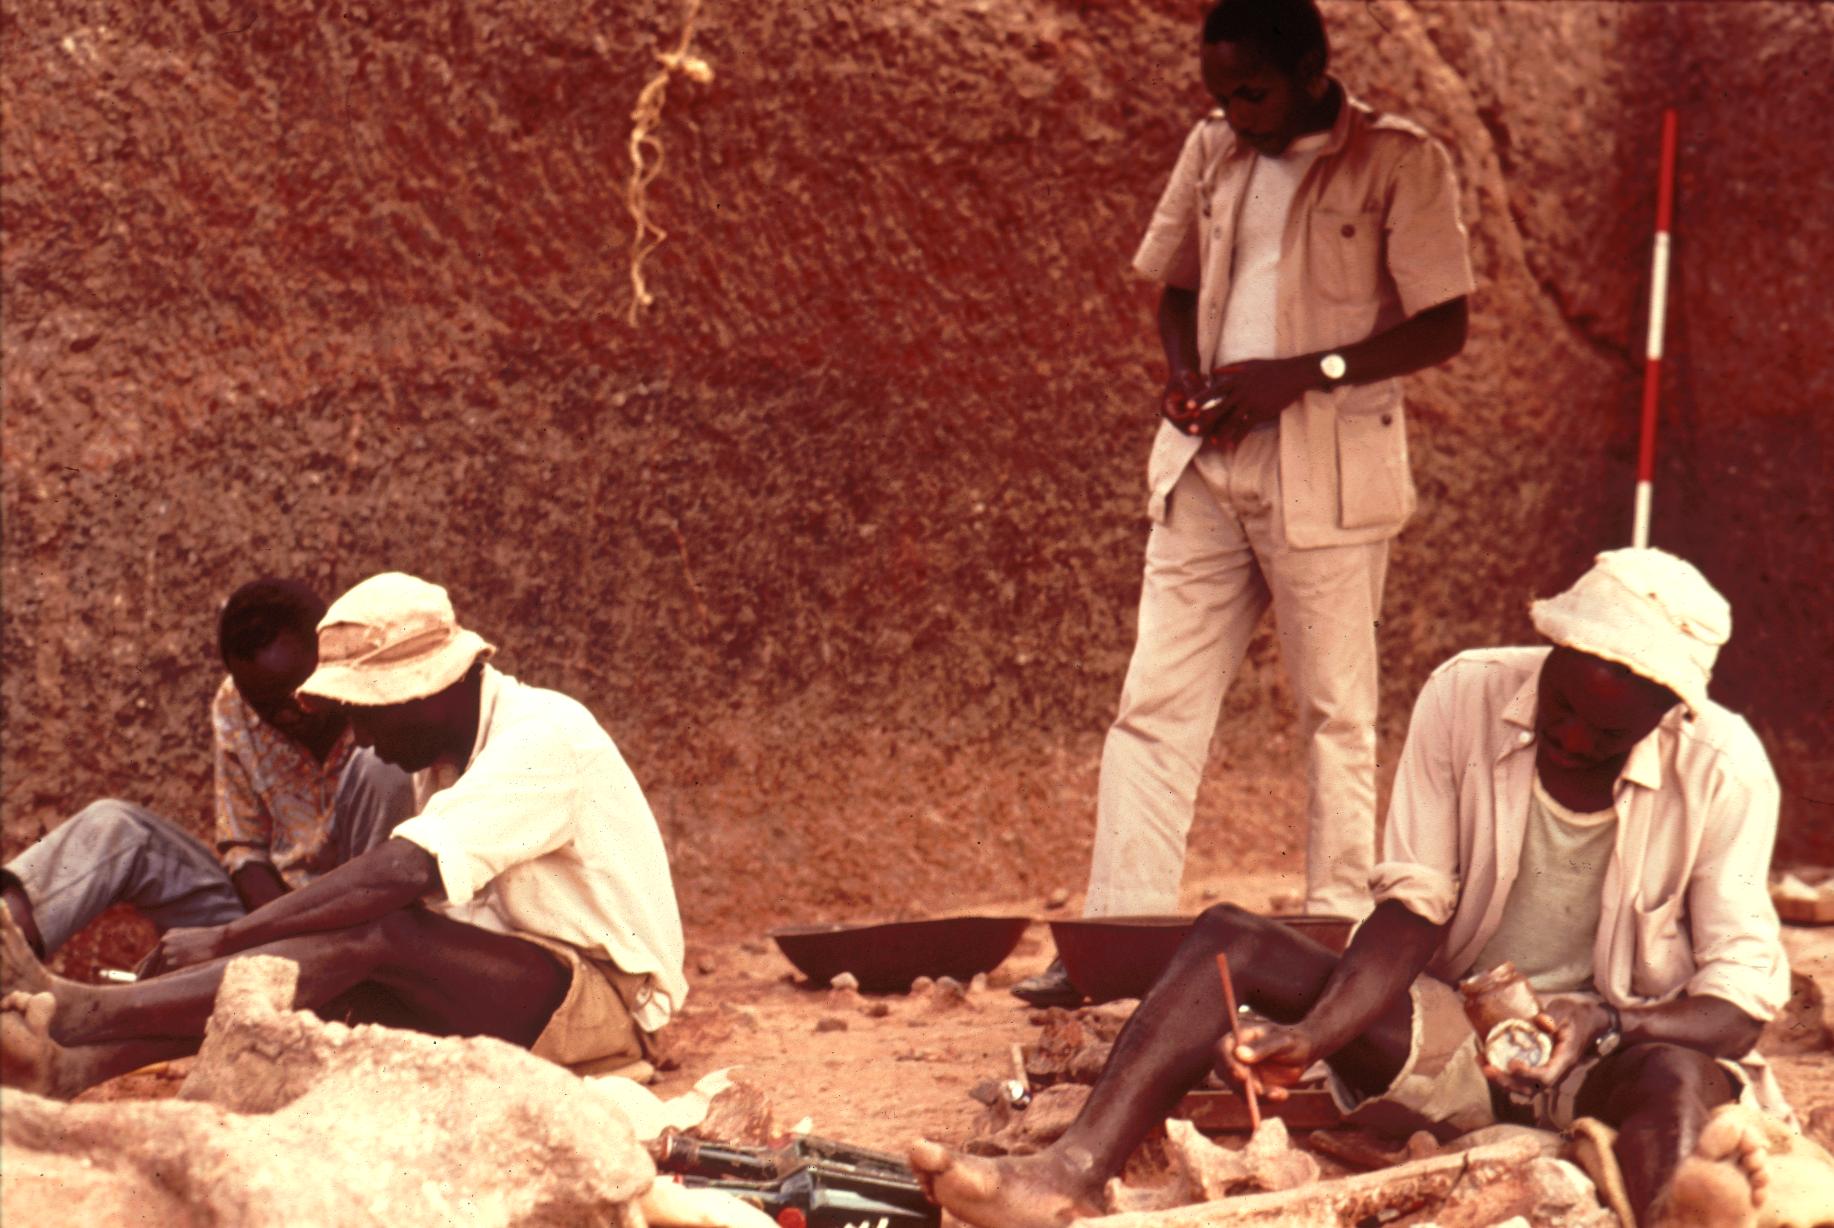 Workers Excavating a Fossil in Olduvai Gorge